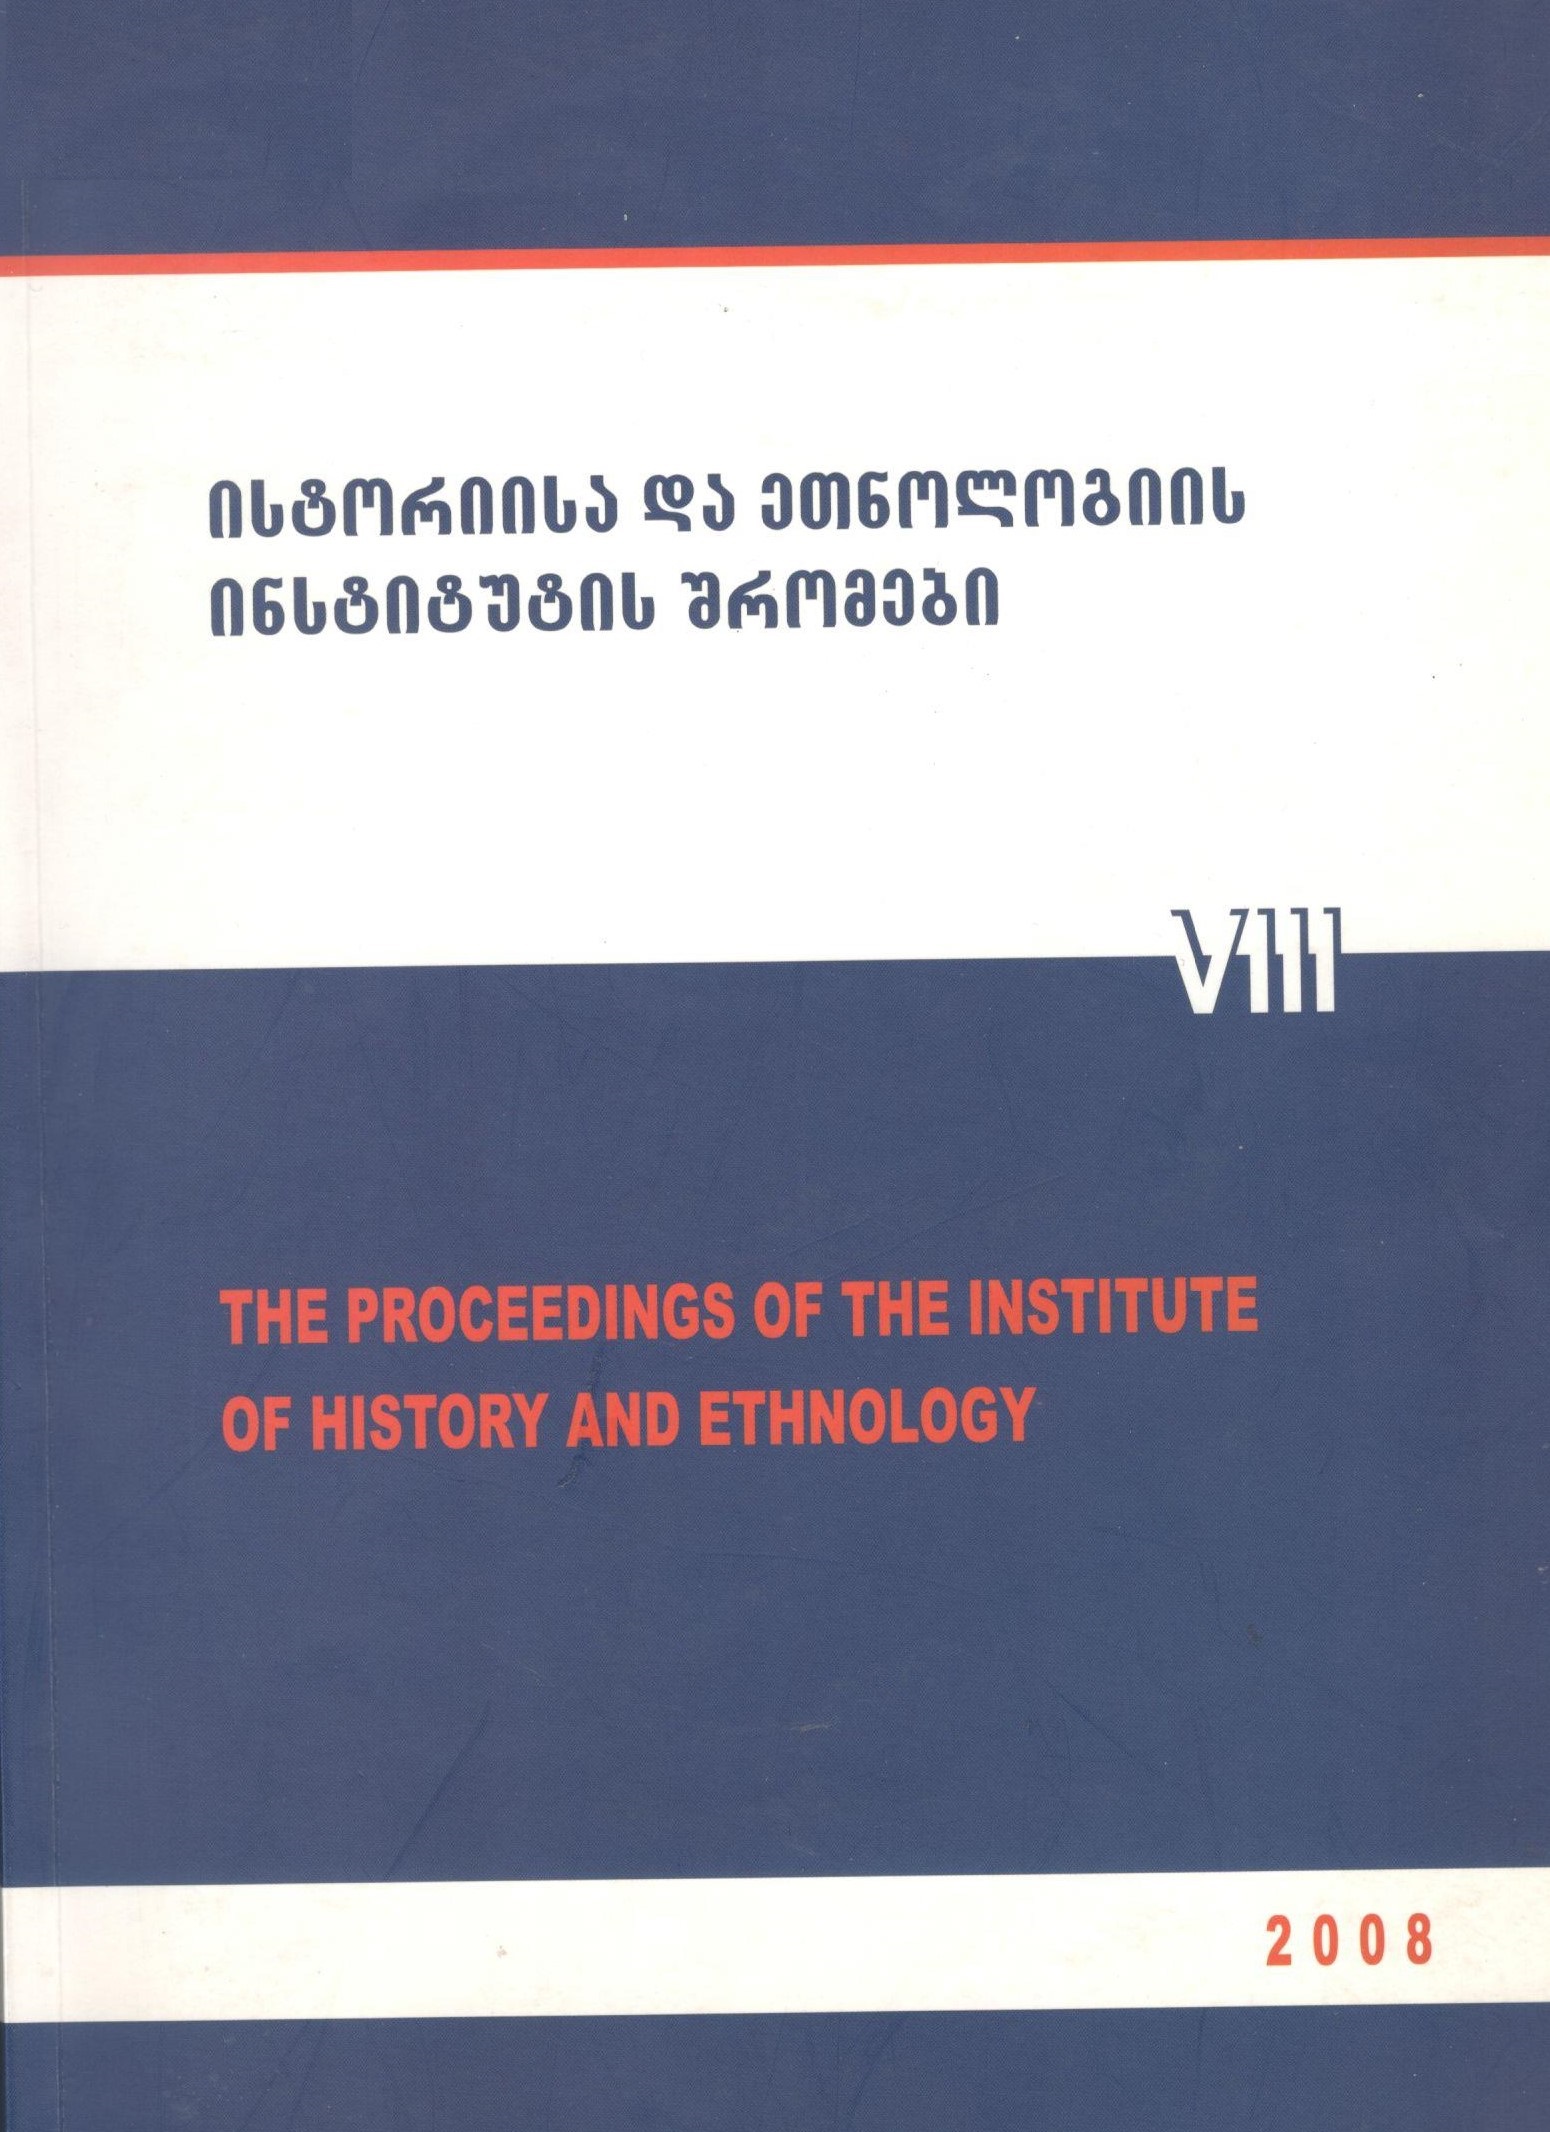 The Proceedings of the Institute of History and Ethnology VIII